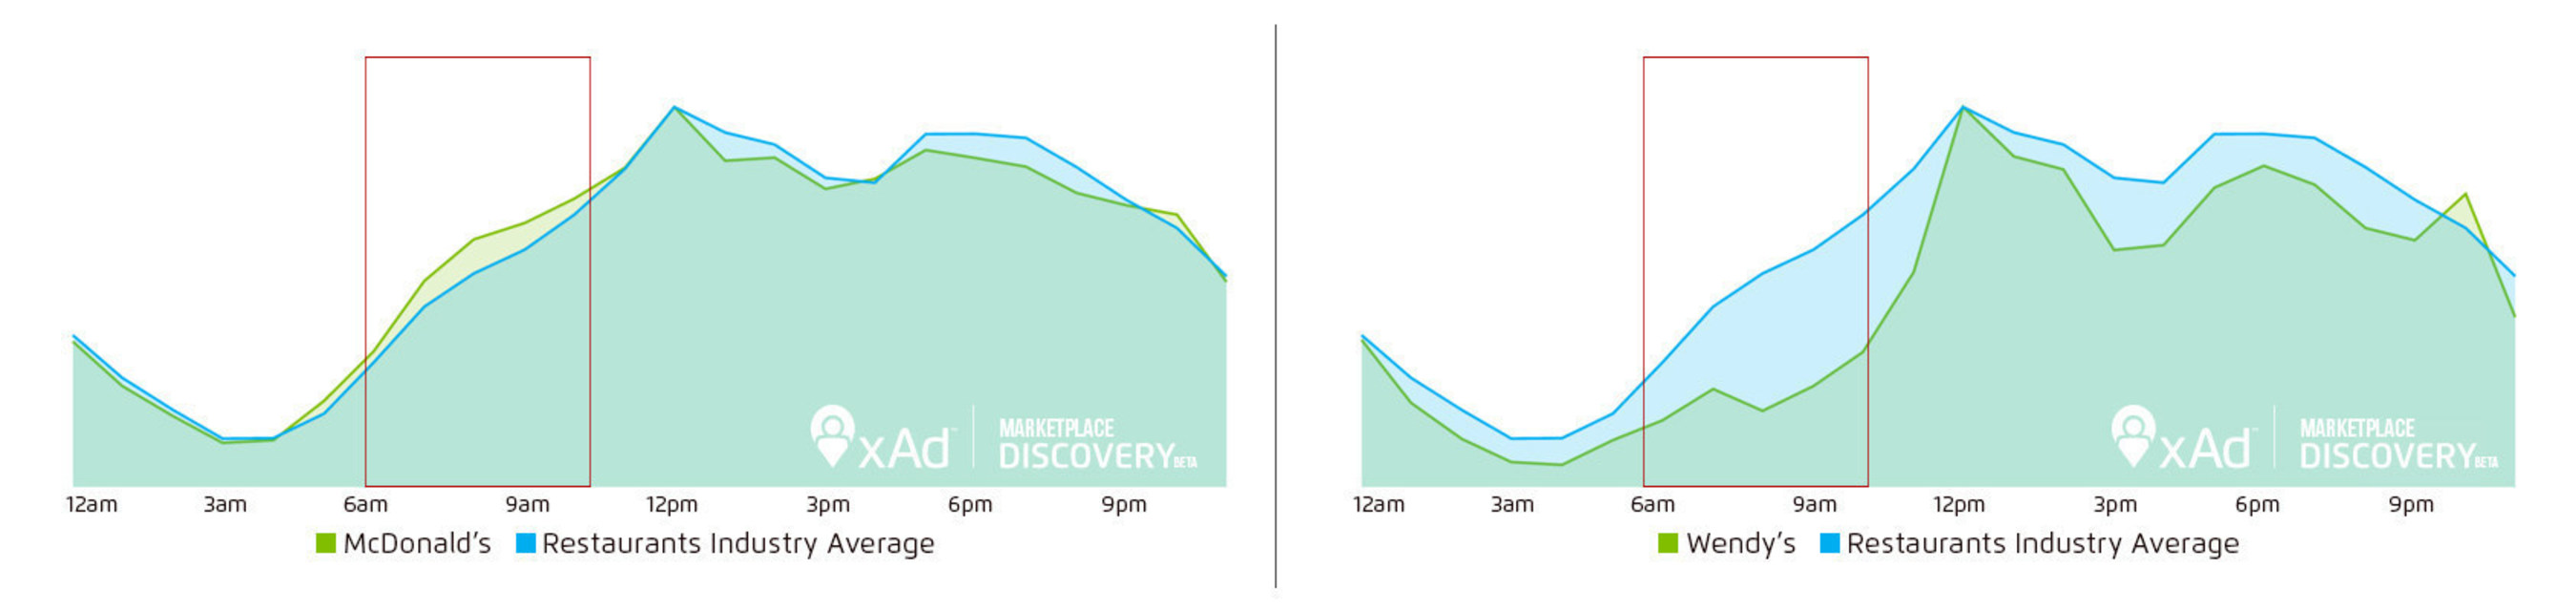 McDonald's vs. Wendy's Foot Traffic by Time-of-Day, Average for June -- Source: xAd MarketPlace Discovery